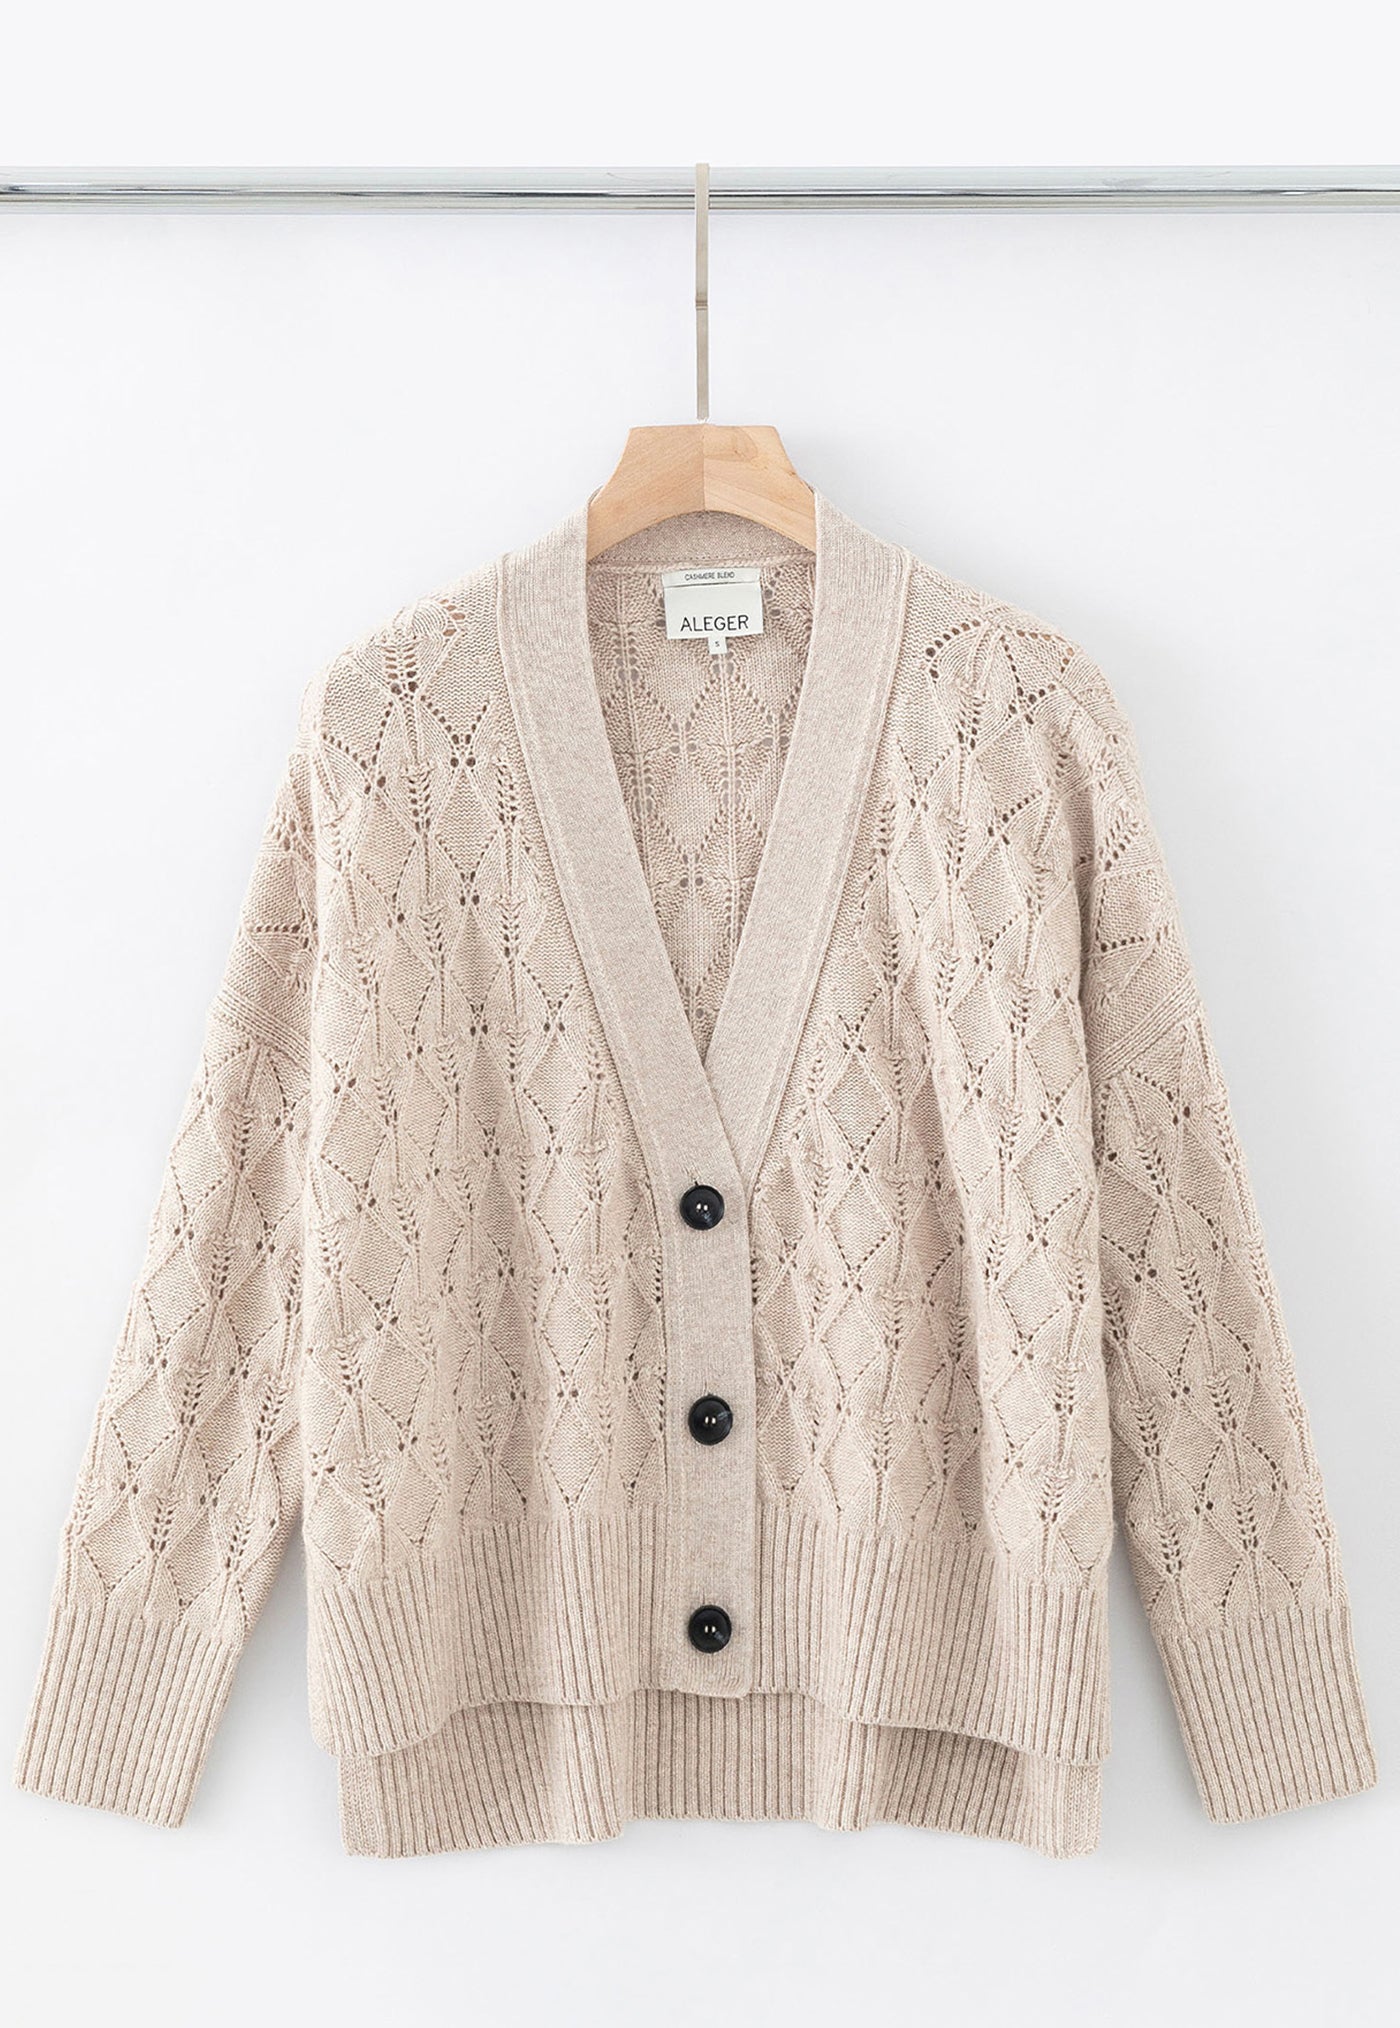 N.101 Cashmere Diamond Cardigan - Oats sold by Angel Divine